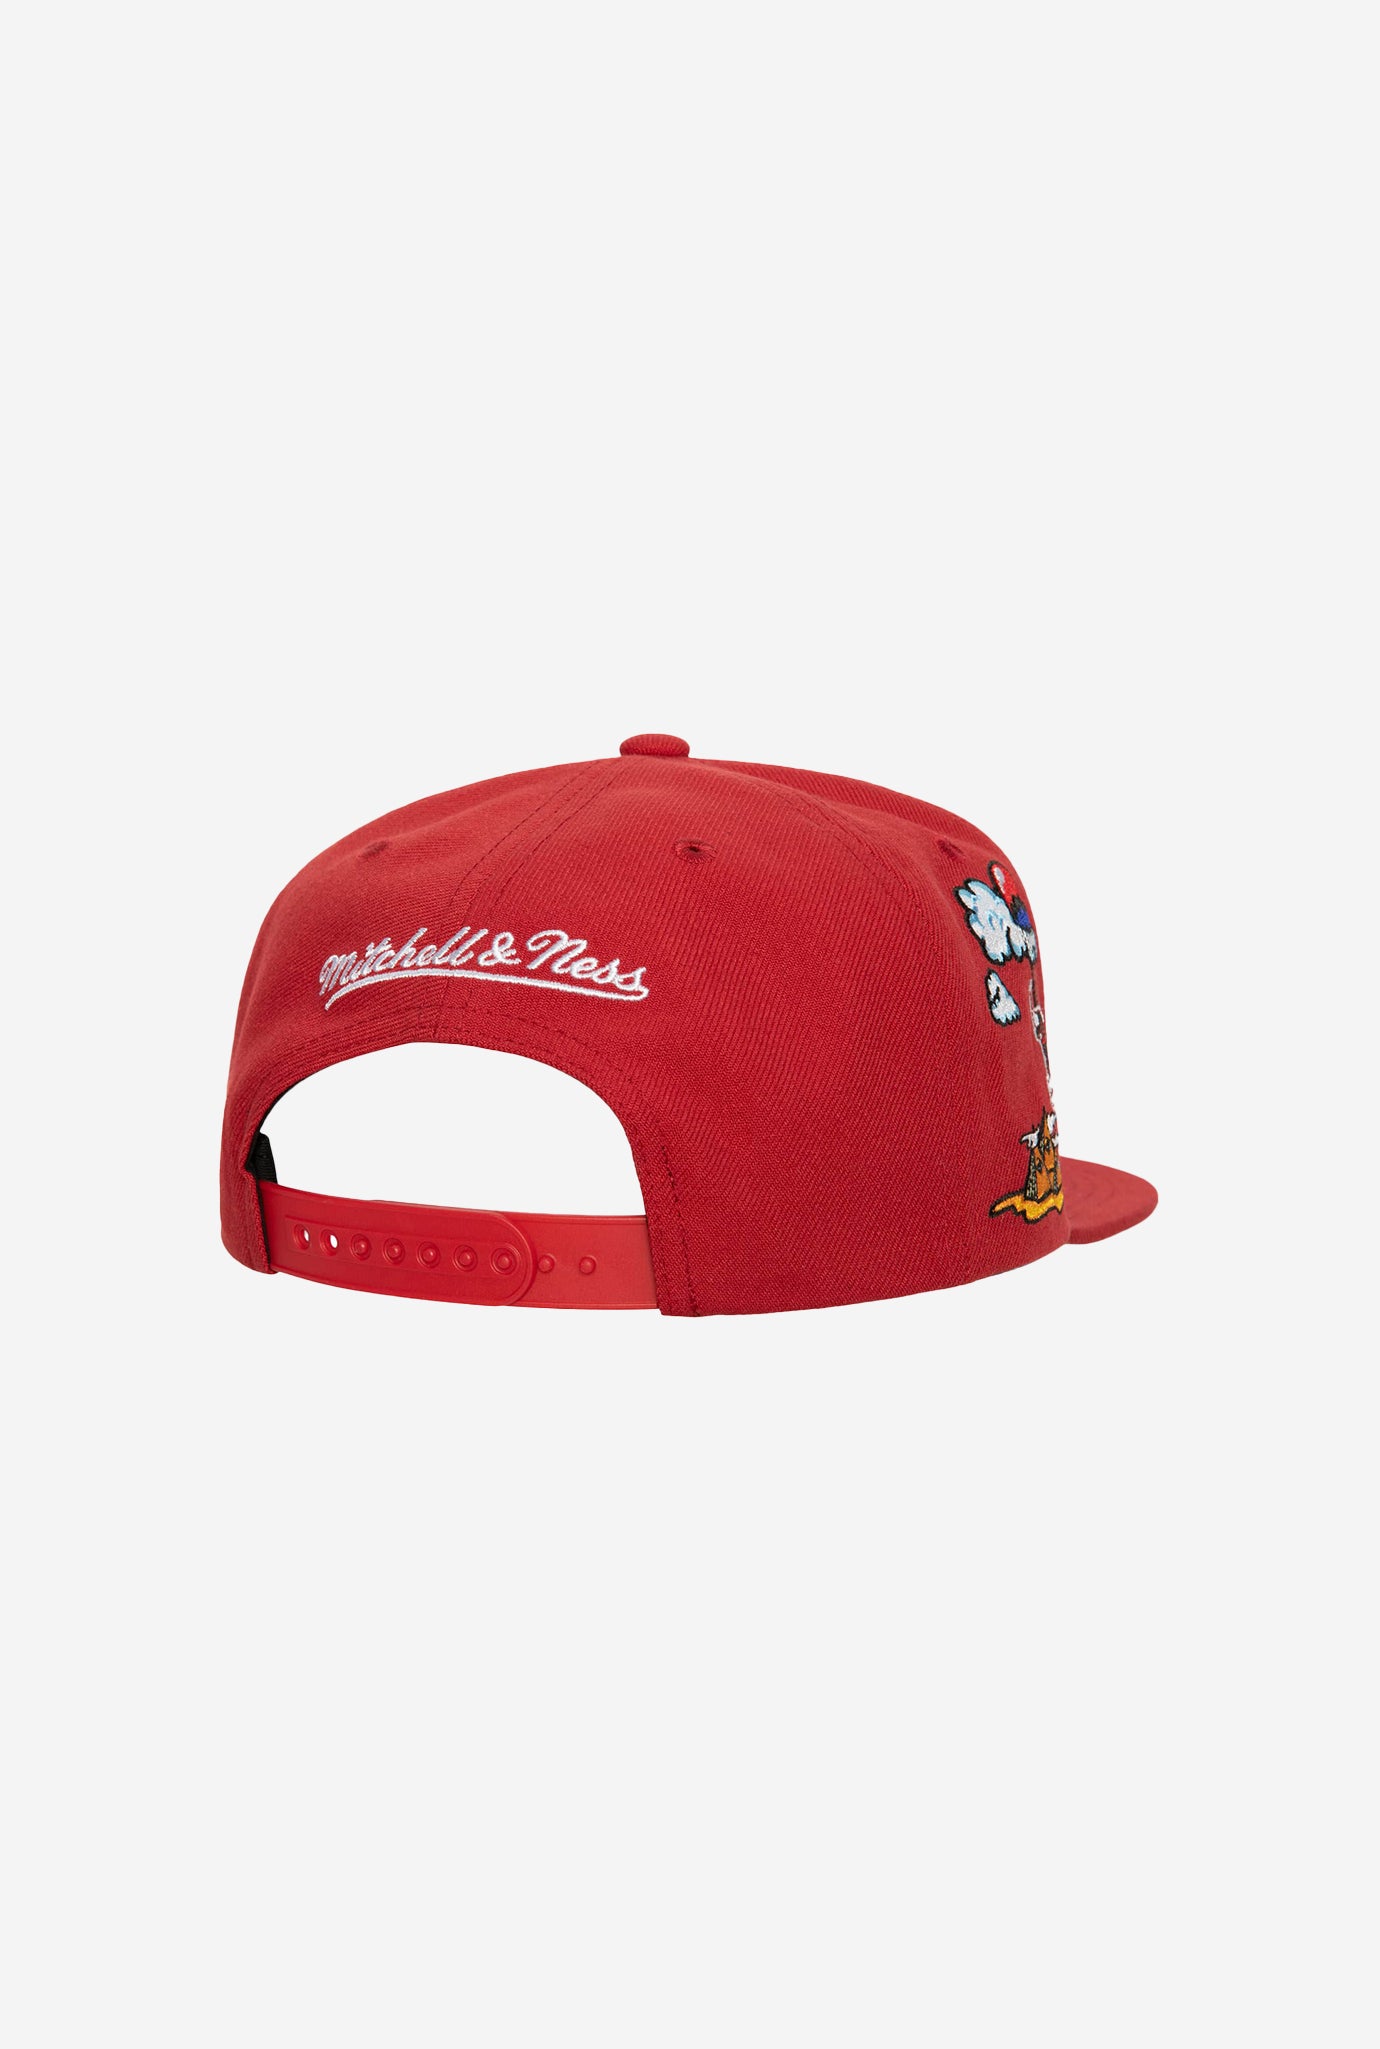 Chicago Bulls Psychedelic Snapback - Red